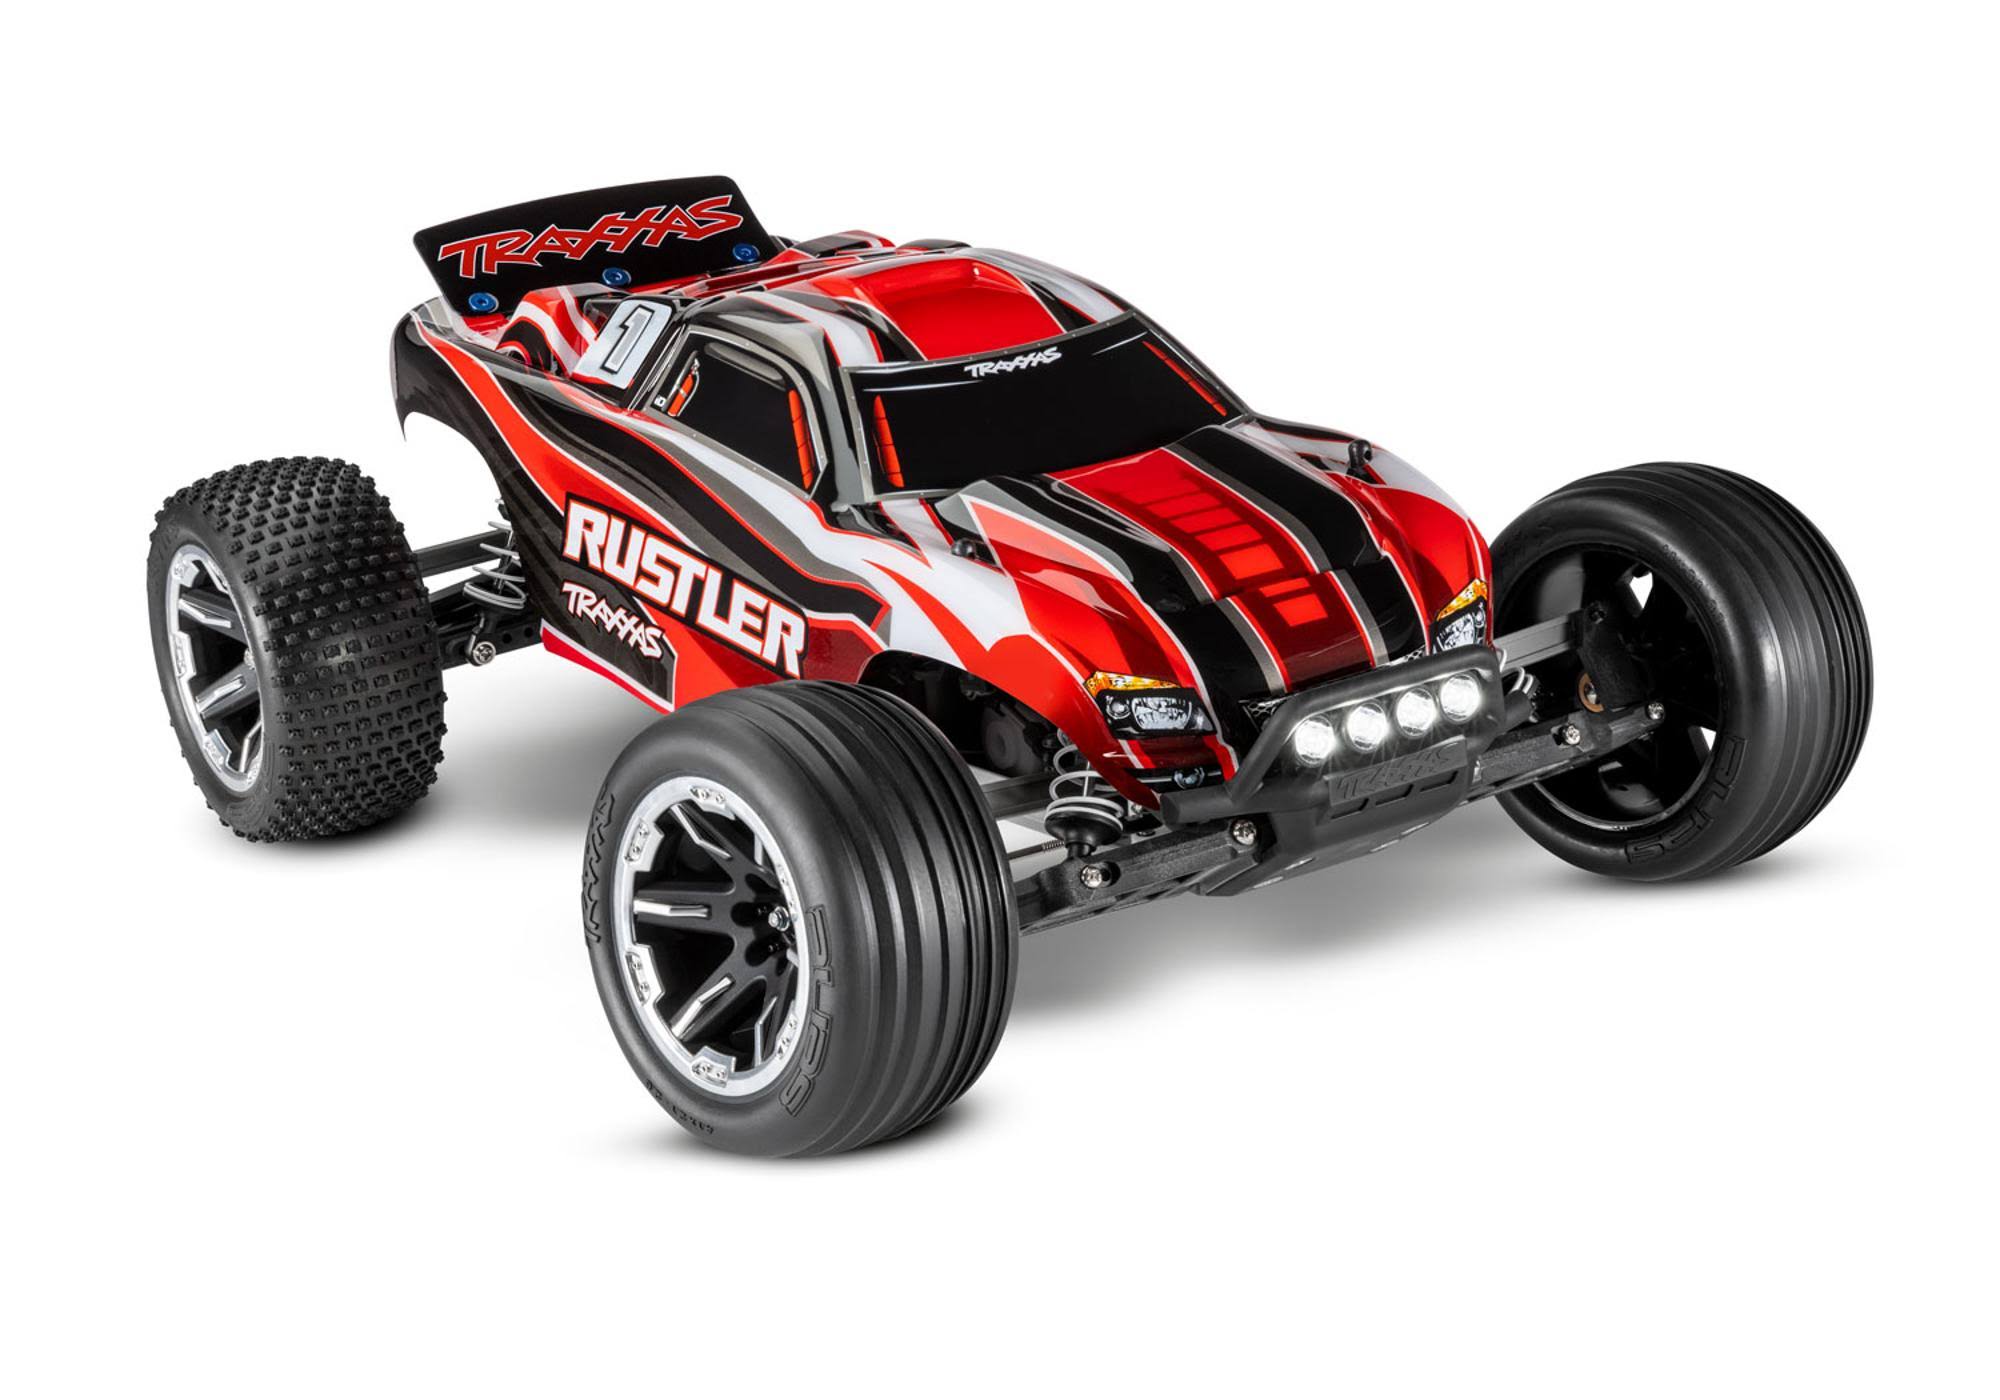 Traxxas 1/10 Rustler 2WD RTR Stadium Truck with Lights - Red/Black